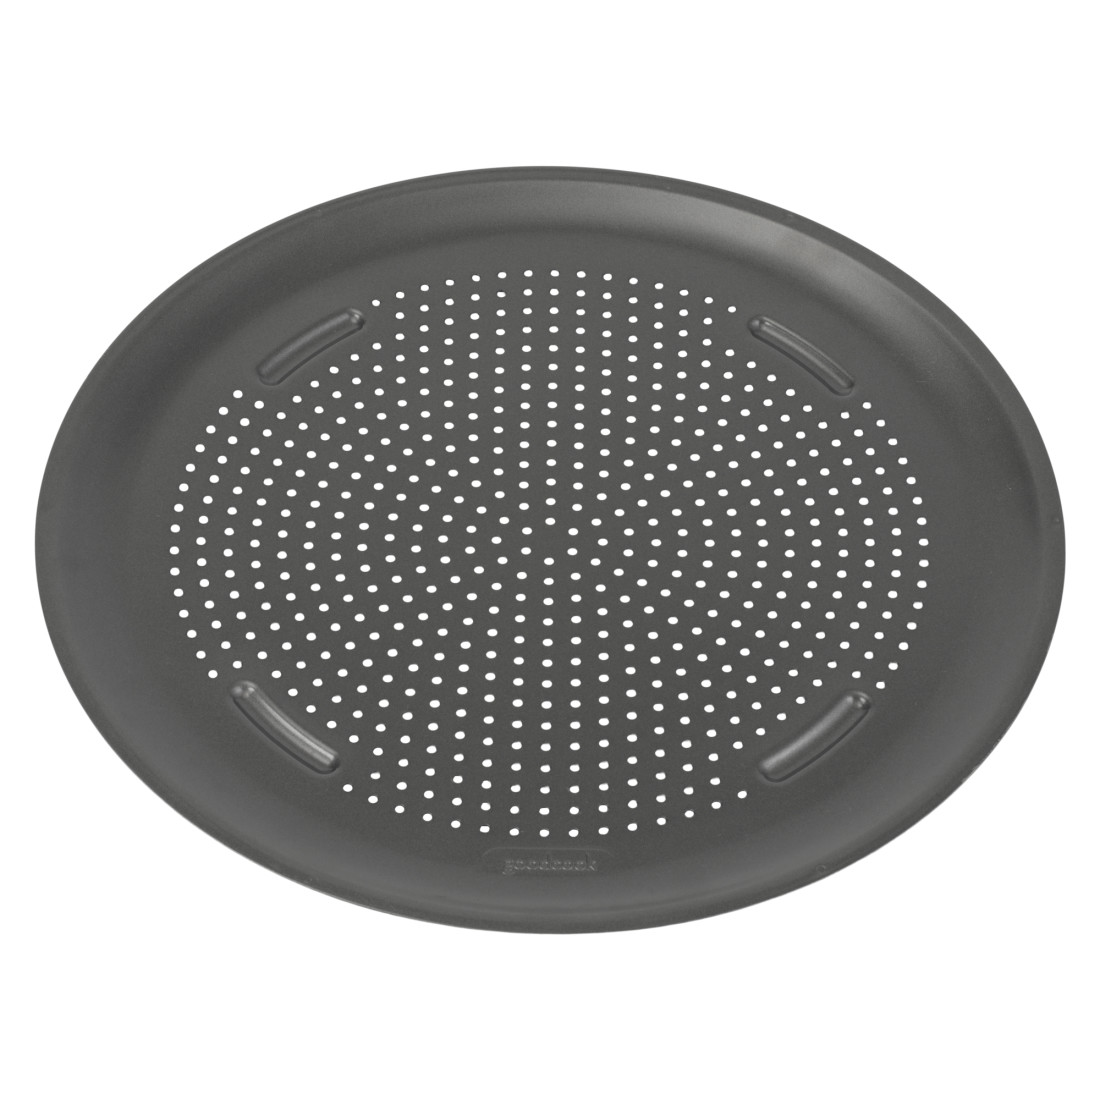 8 Non-Stick Round Cake Pan Carbon Steel - Made By Design 1 ct